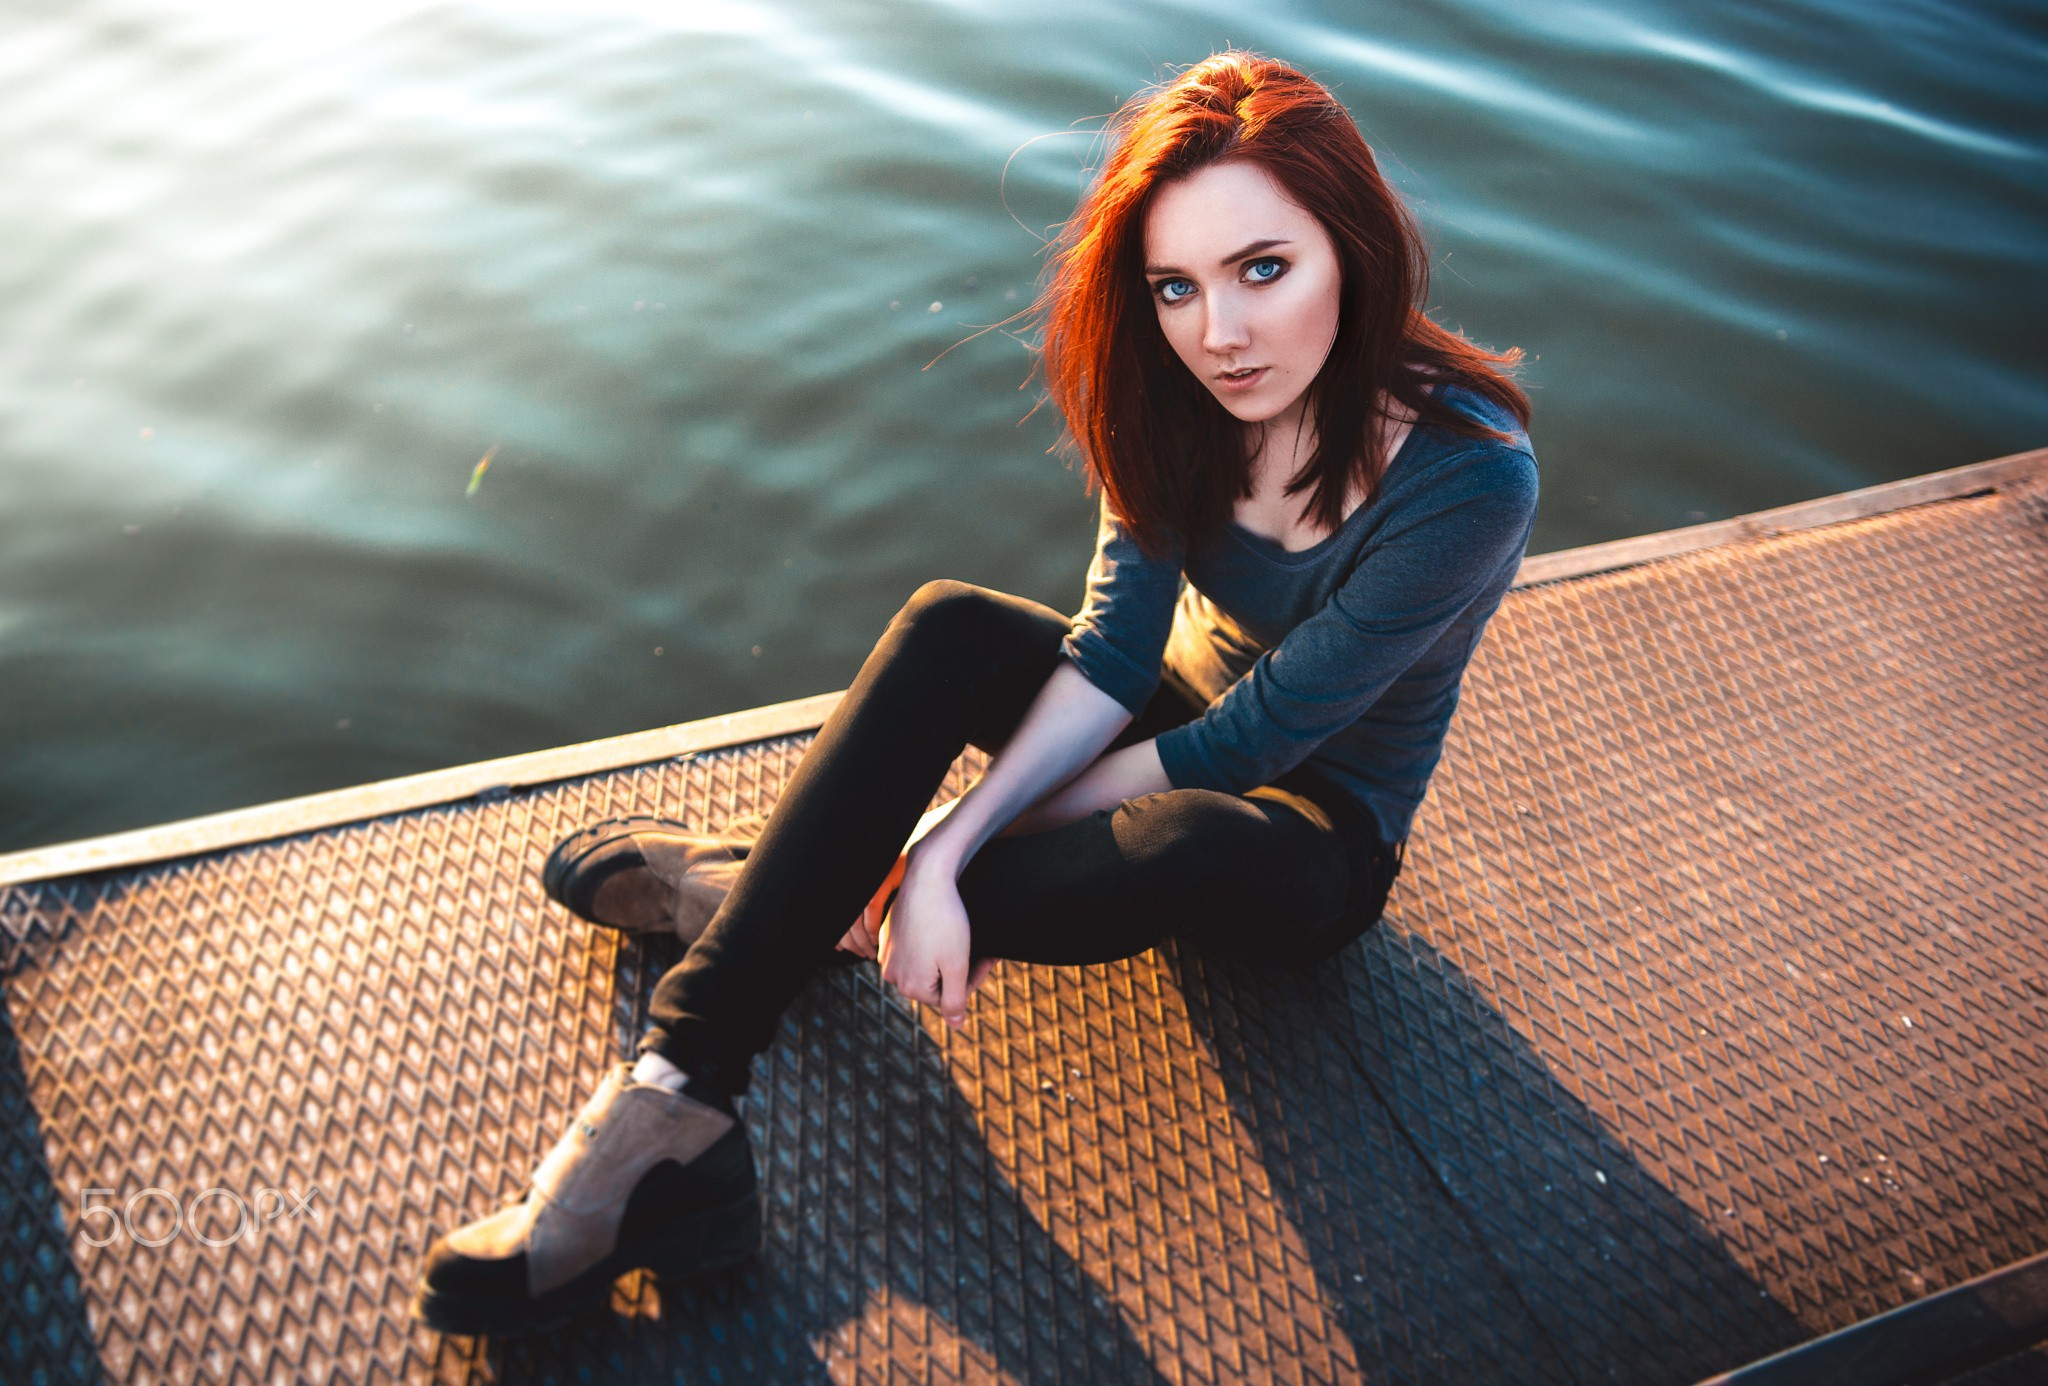 2048x1386 Wallpaper : women, redhead, model, blue eyes, water, glasses, looking at viewer, sitting, dress, pants, clothing, girl, beauty, lady, leg, photograph, image, human positions, portrait photography, photo shoot Motta123